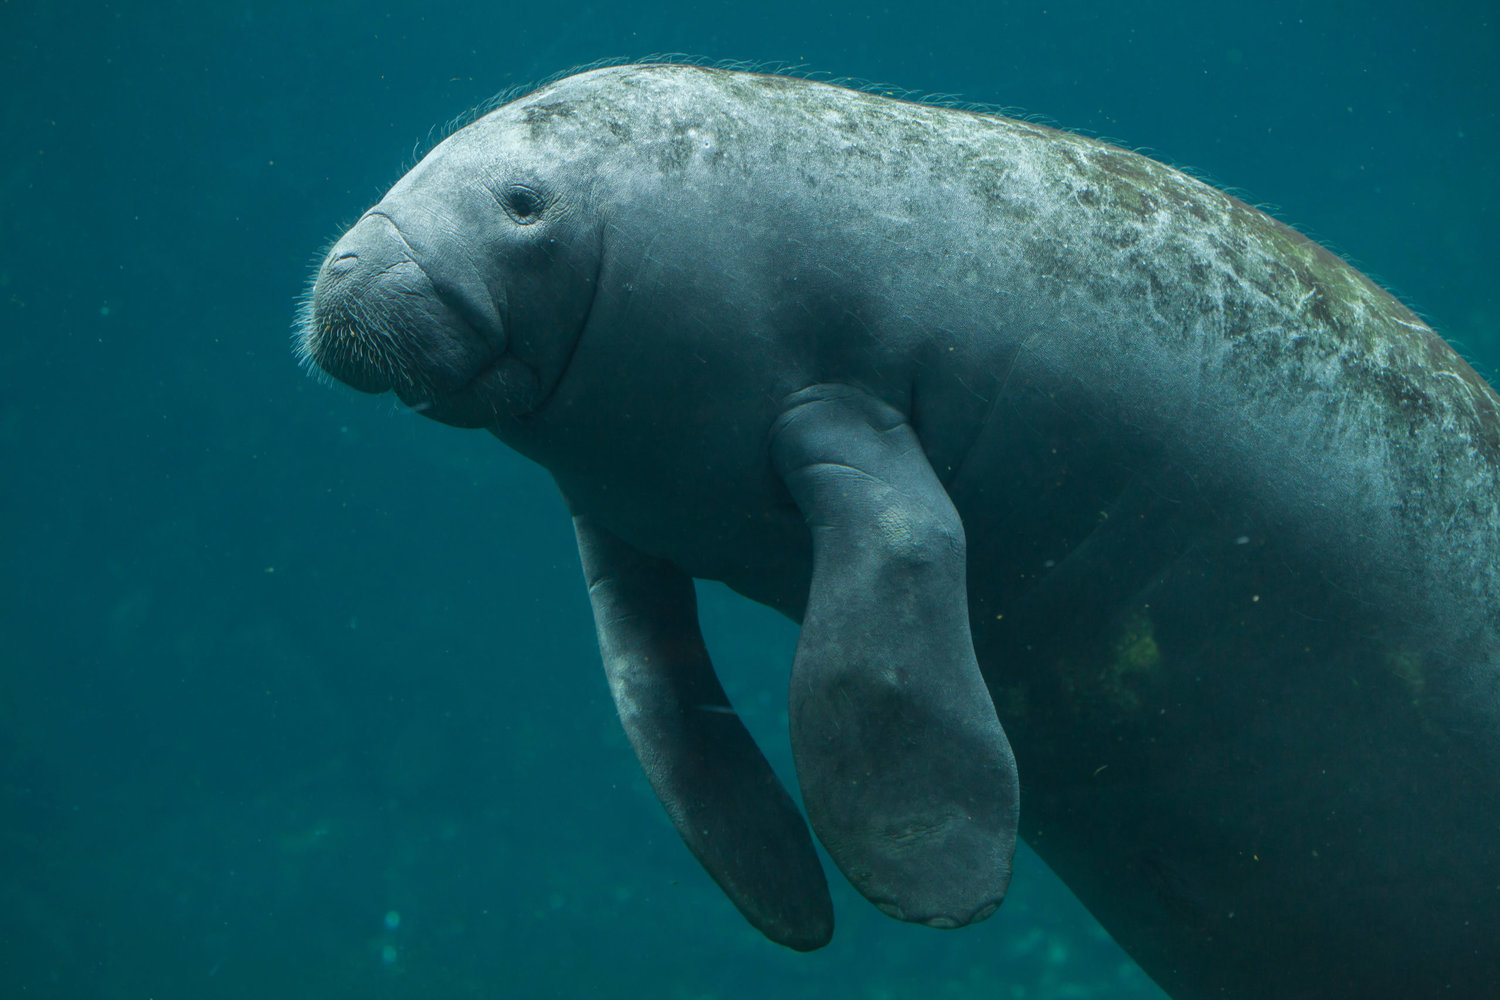 The most recent manatee population survey by the Florida Fish and Wildlife Conservation Commission shows 400 Florida manatees died in 2019. But 2021 could set a new mortality record, due to water pollution and loss of food and habitat. (Adobe Stock)